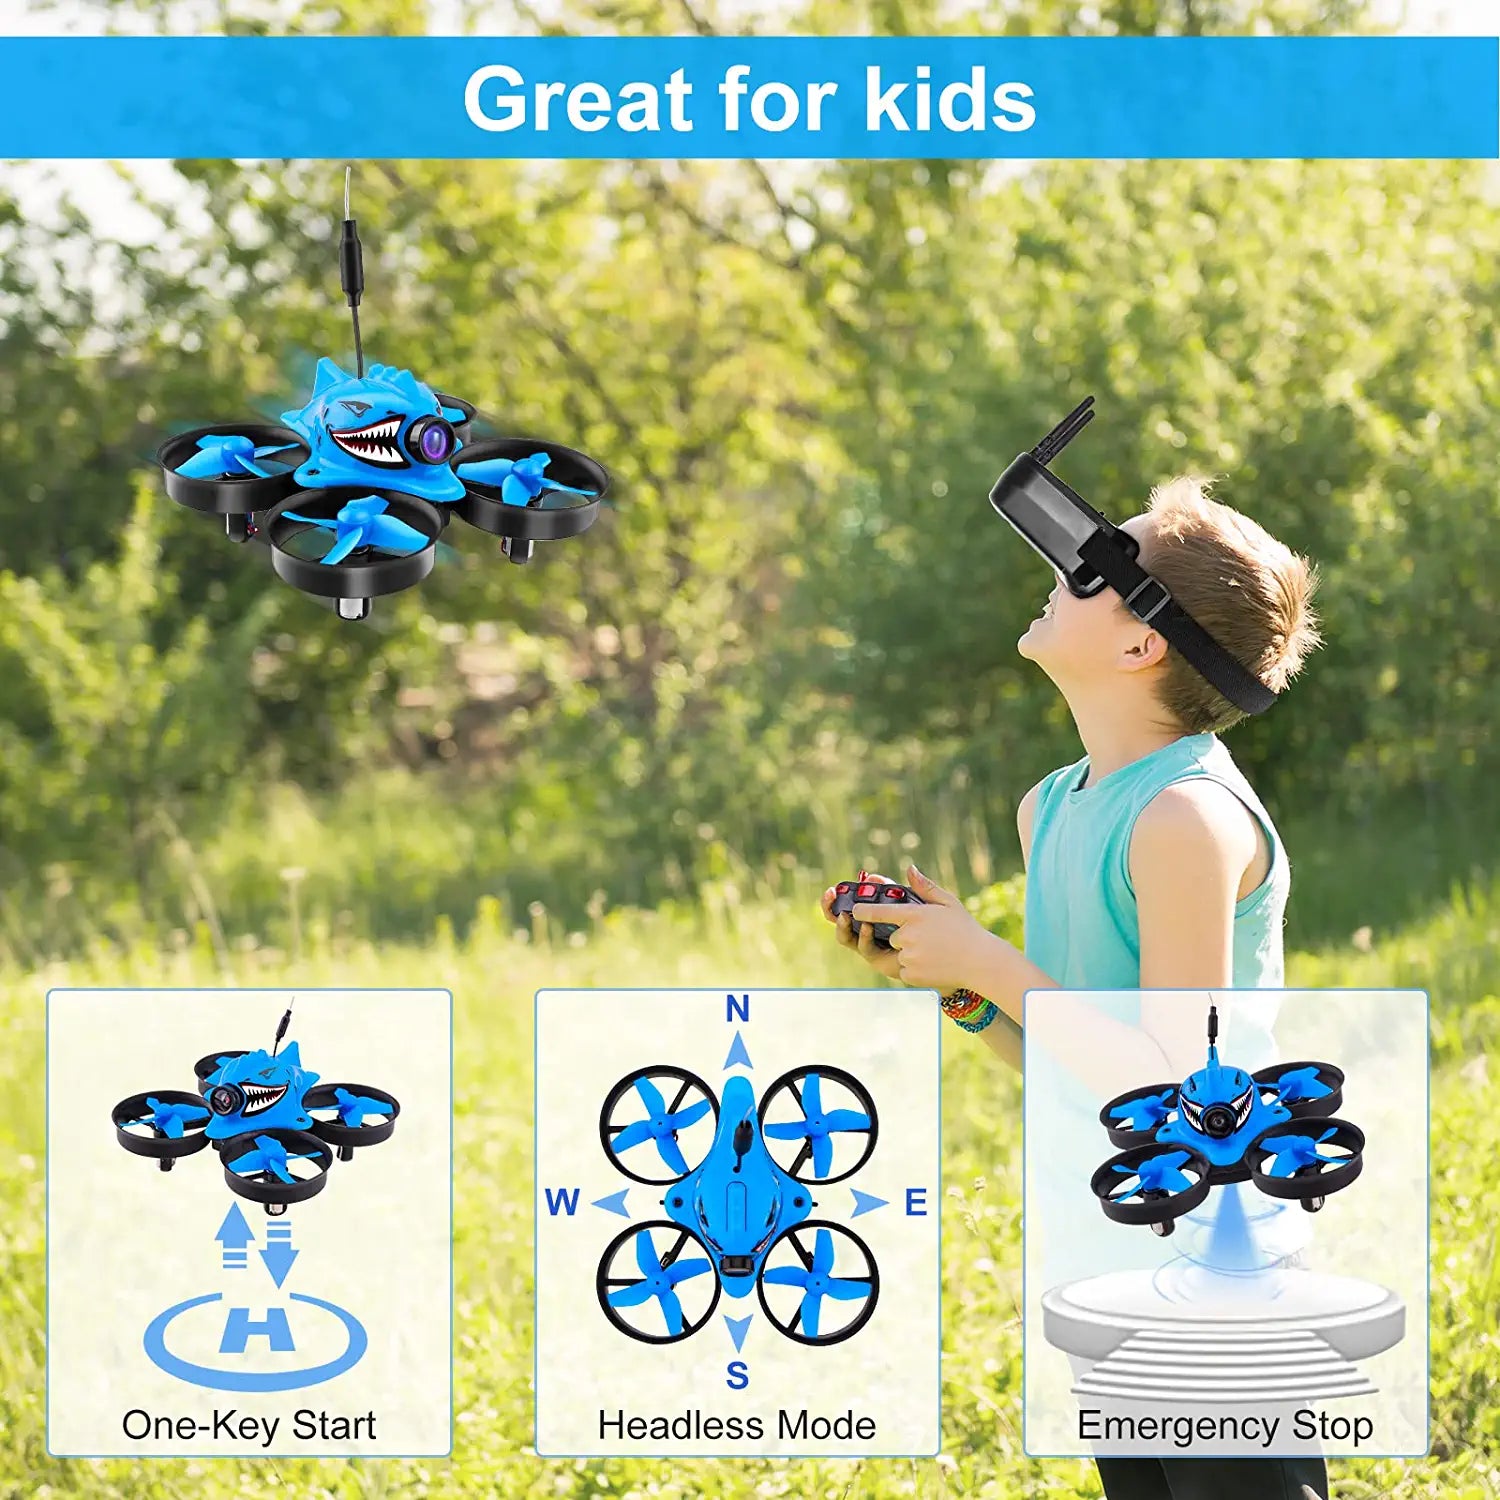 Makerfire Micro FPV Racing Drone - with FPV Goggles 5.8G 40CH 1000TVL Camera RTF Tiny Whoop Mini FPV Quadcopter for Beginners,Altitude Hold, One Key Return, Headless Mode Armor Blue Shark - RCDrone